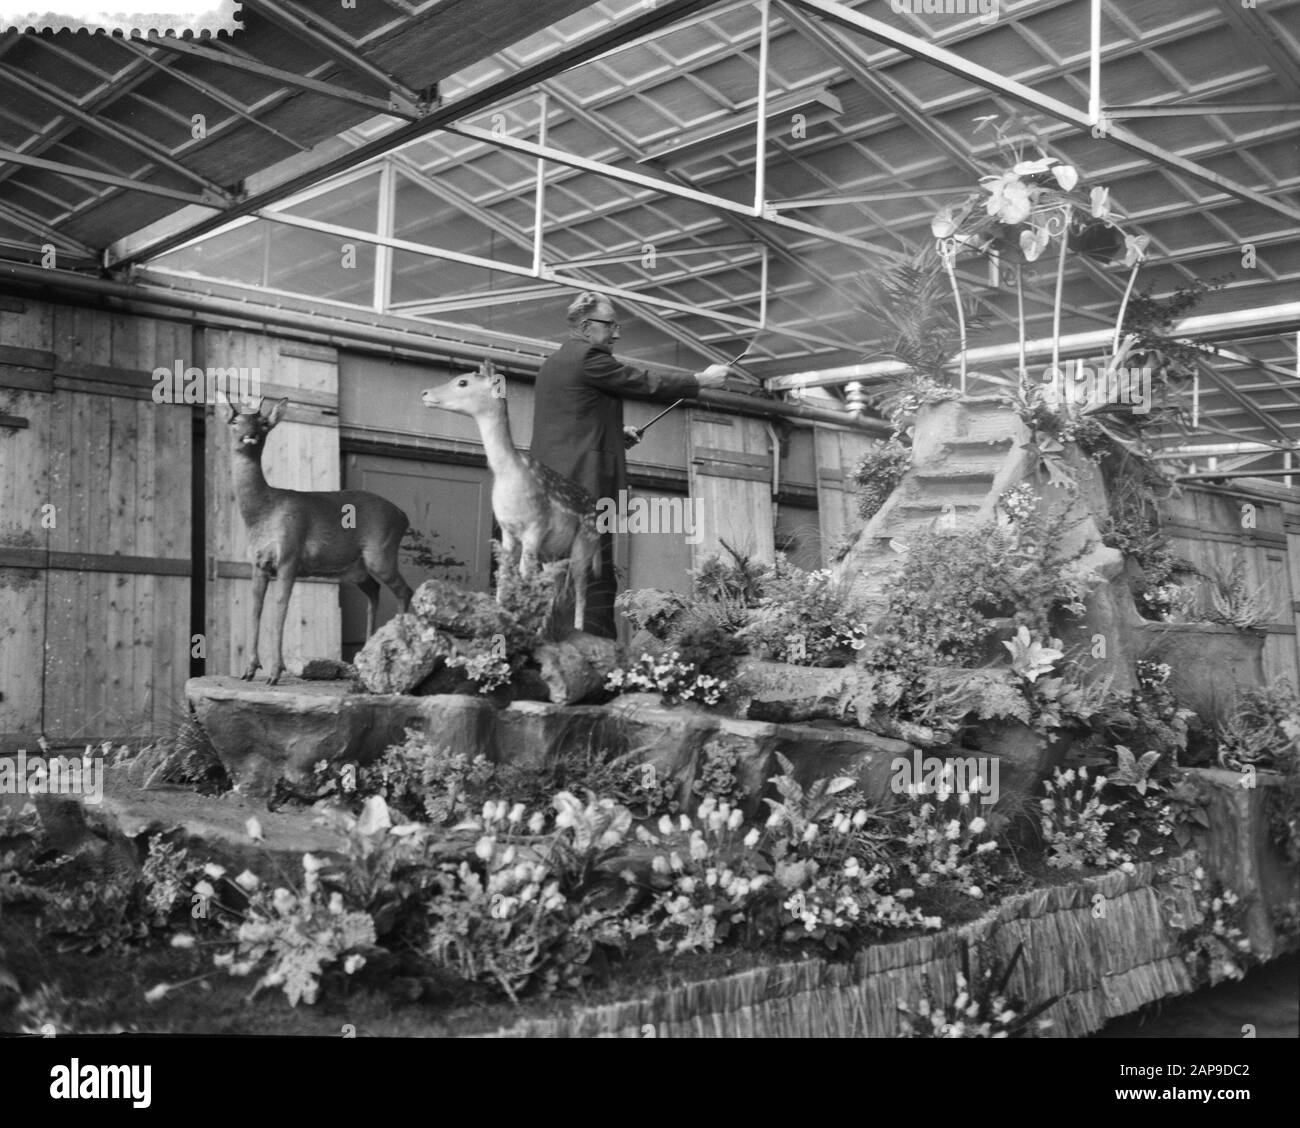 Belgian Day at Floriade, cars are adorned in the Aalsmeerder auction halls for the flower show Date: September 2, 1960 Keywords: FROWERLCORSOS, WARKS, auction halls Personal name: Flower corso Institution name: Floriade Stock Photo